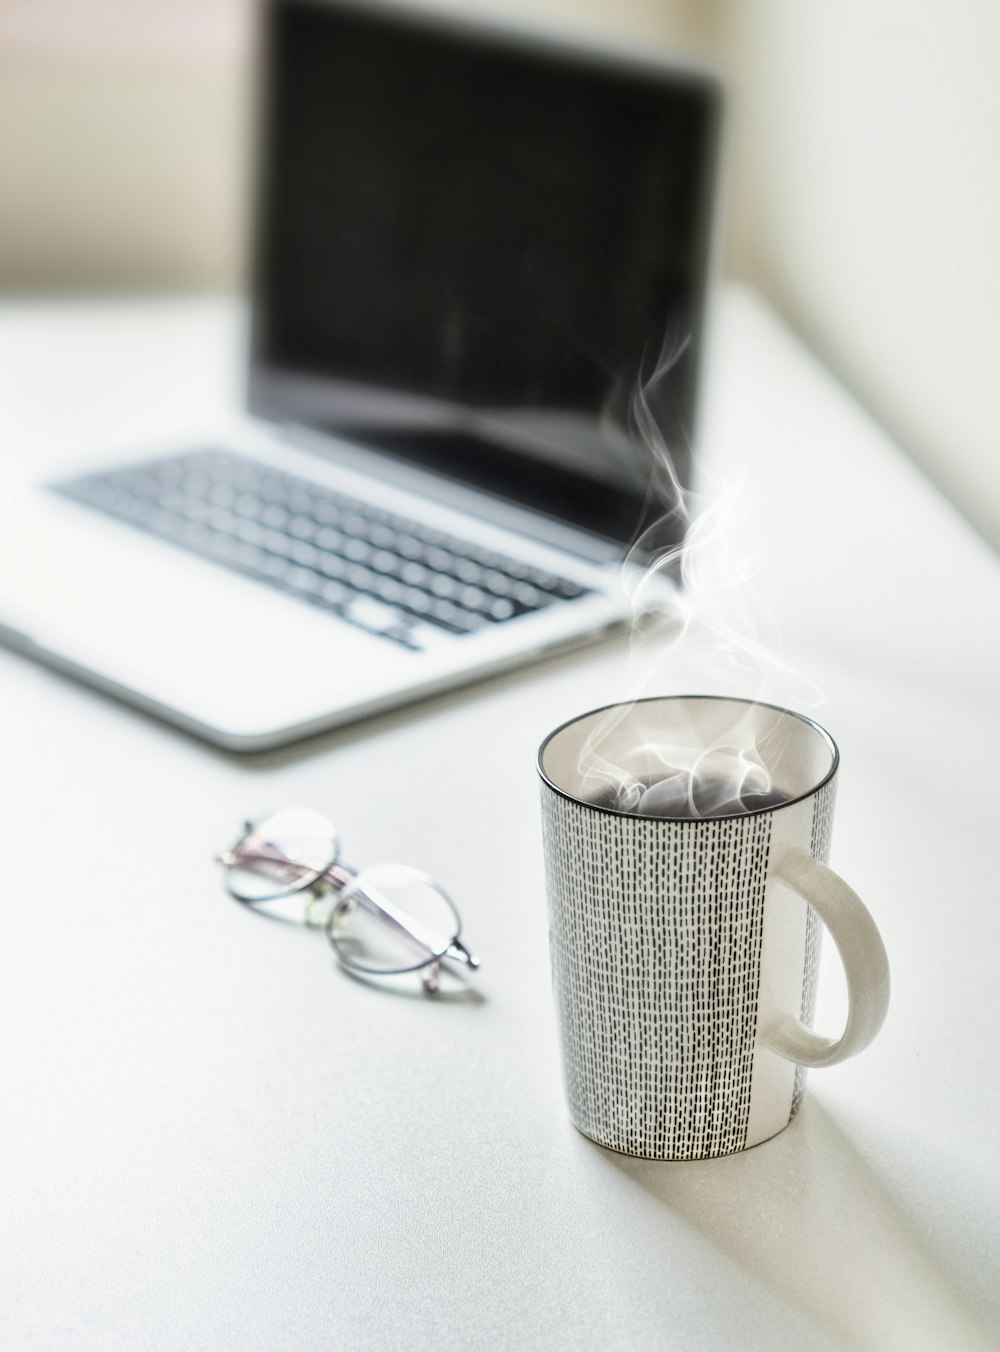 filled cup near eyeglasses and MacBook